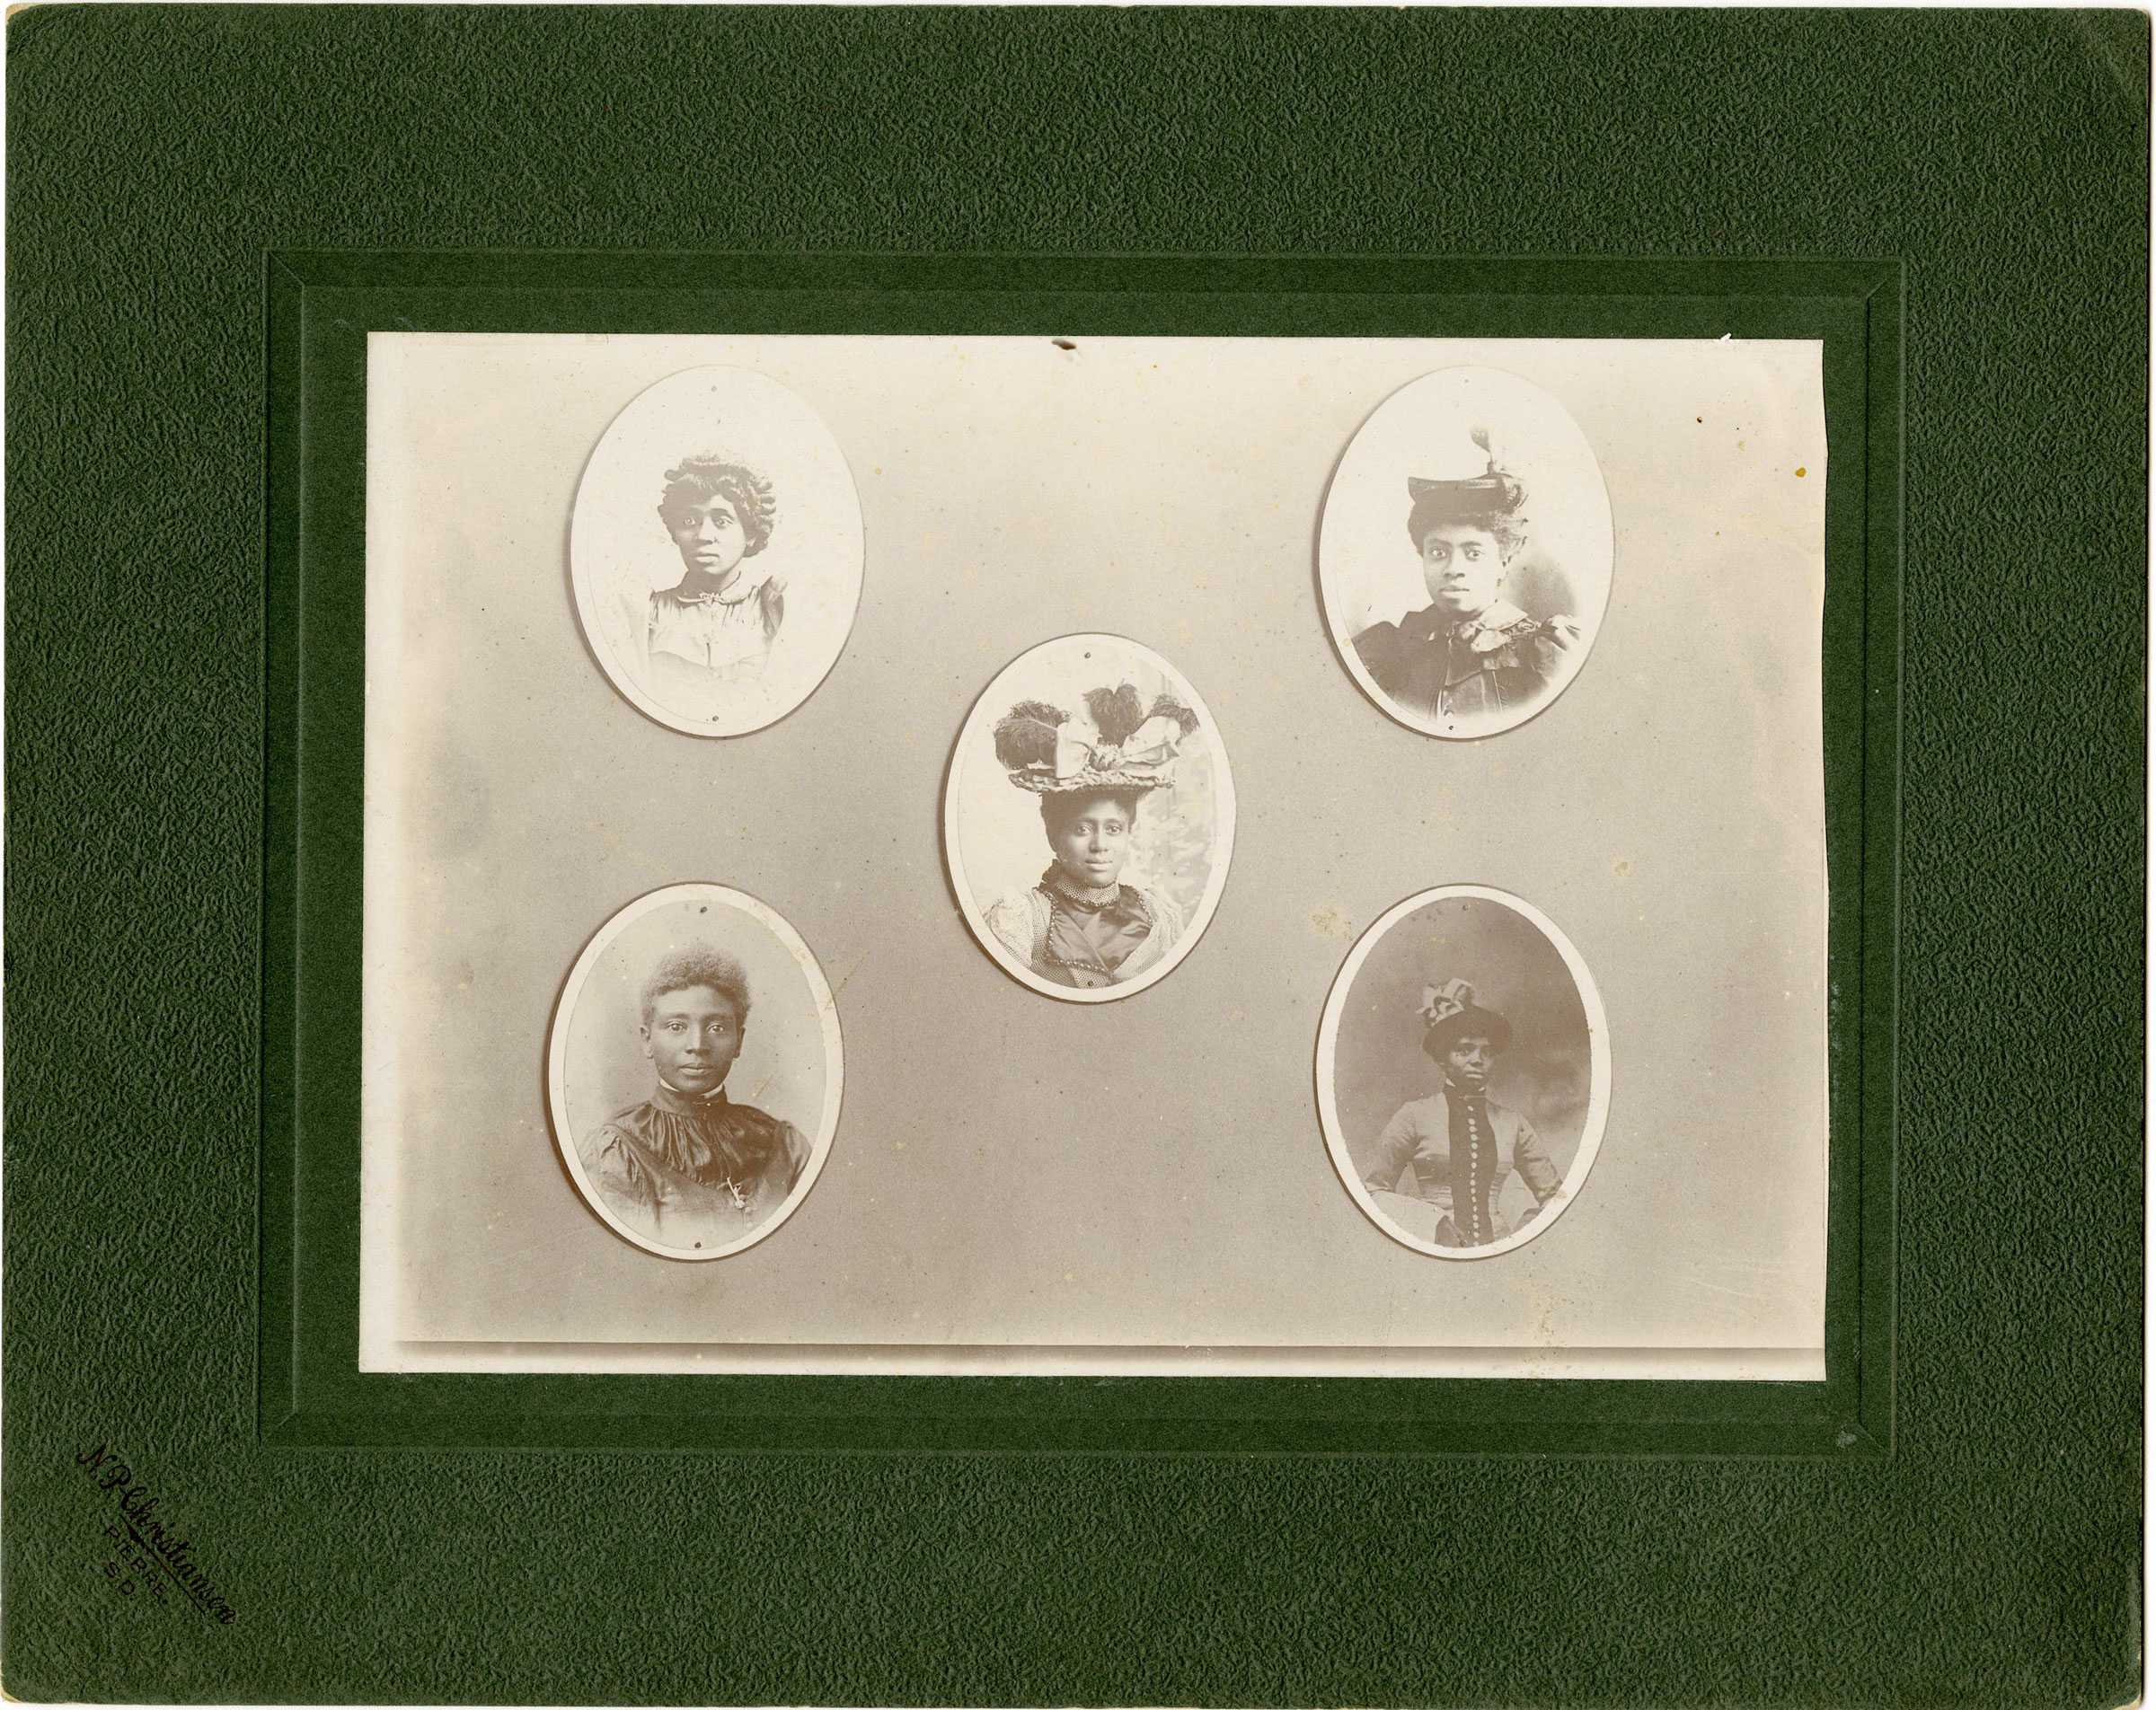 5 oval portraits of the residents. Each woman is wearing a hat, posed in a camera.